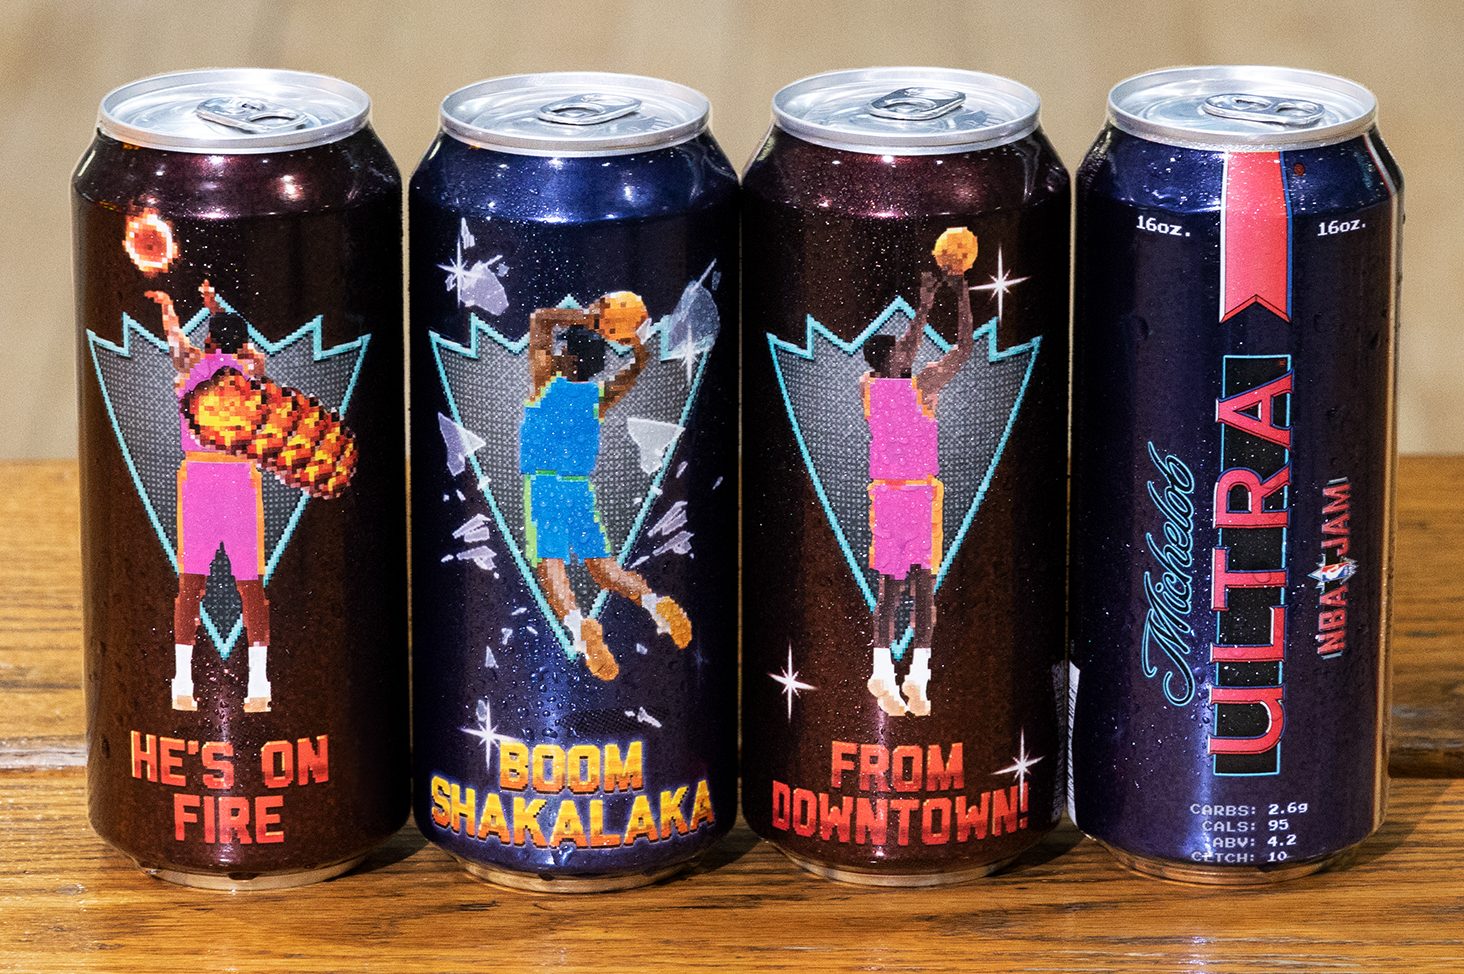 "NBA Jam"-inspired, limited-edition cans featuring iconic catch phrases and images from the game will be available in select Cleveland bars